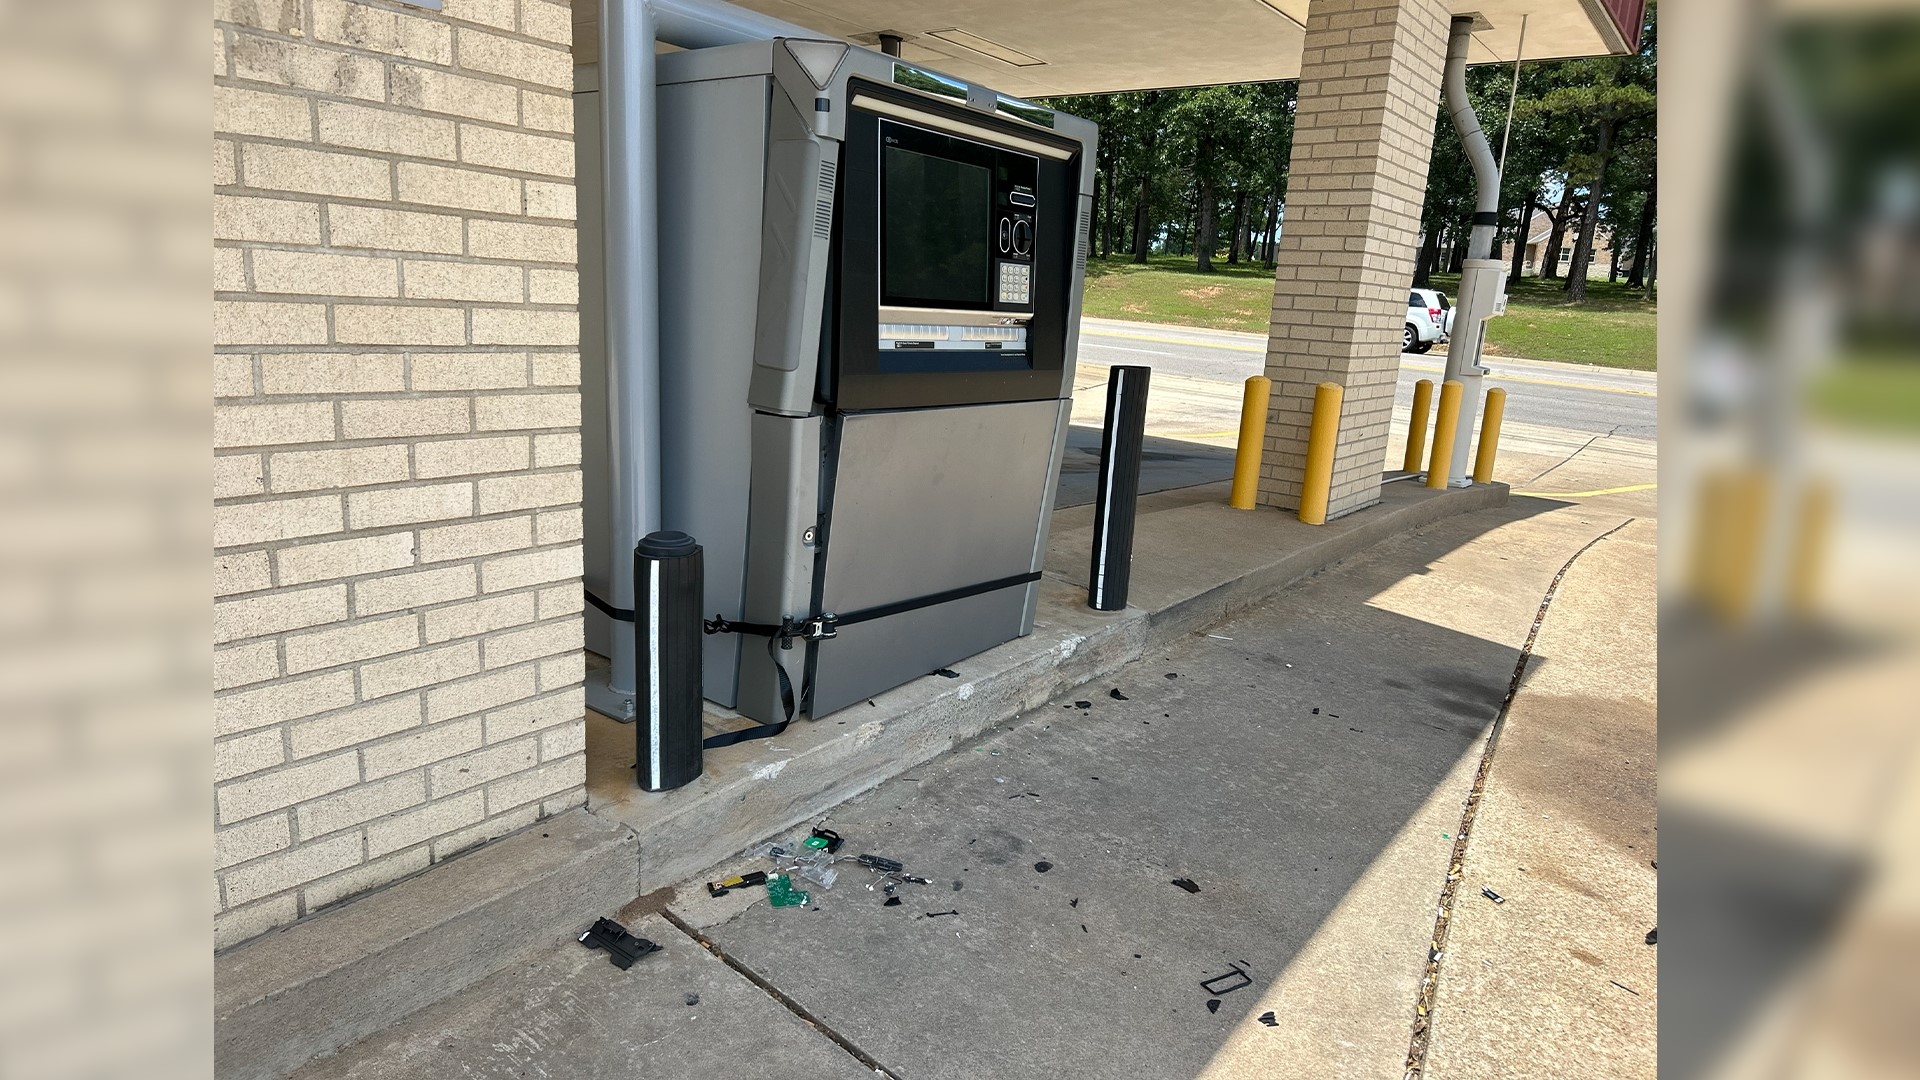 Fort Smith police are looking for a suspect in connection to an attempted ATM theft on the morning of Sunday, June 11.